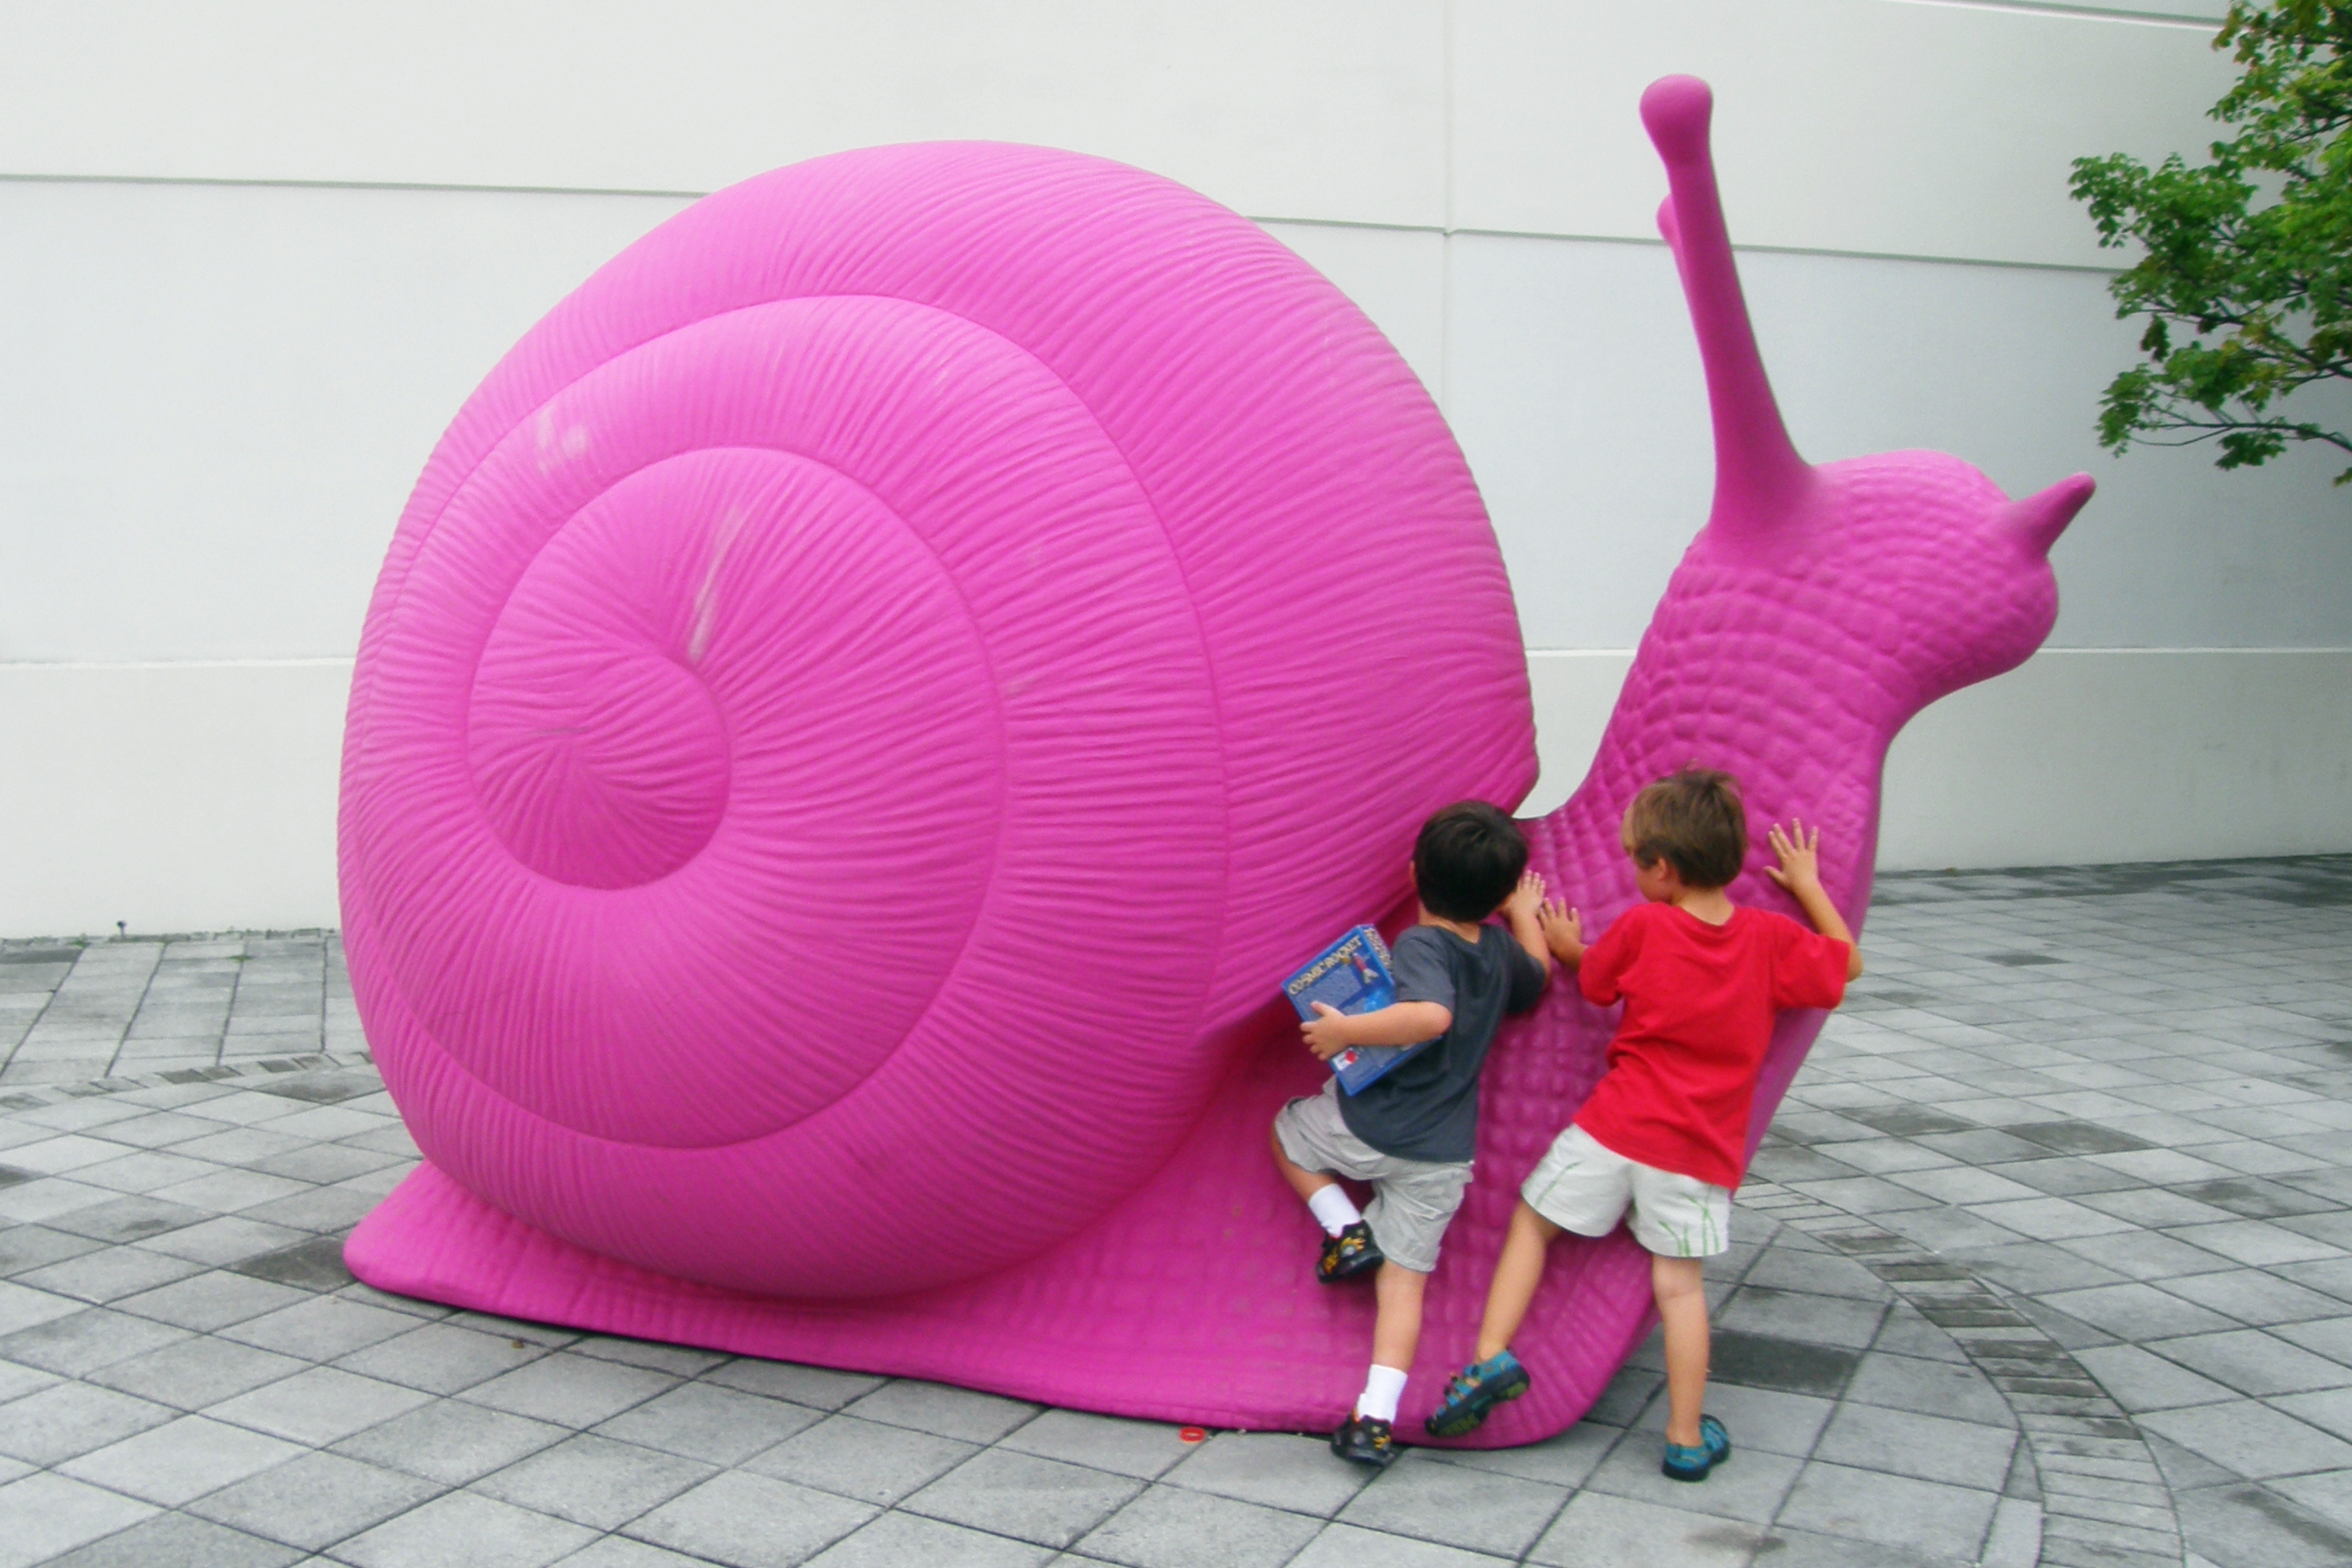 Two boys trying to climb up a sculpture of a snail